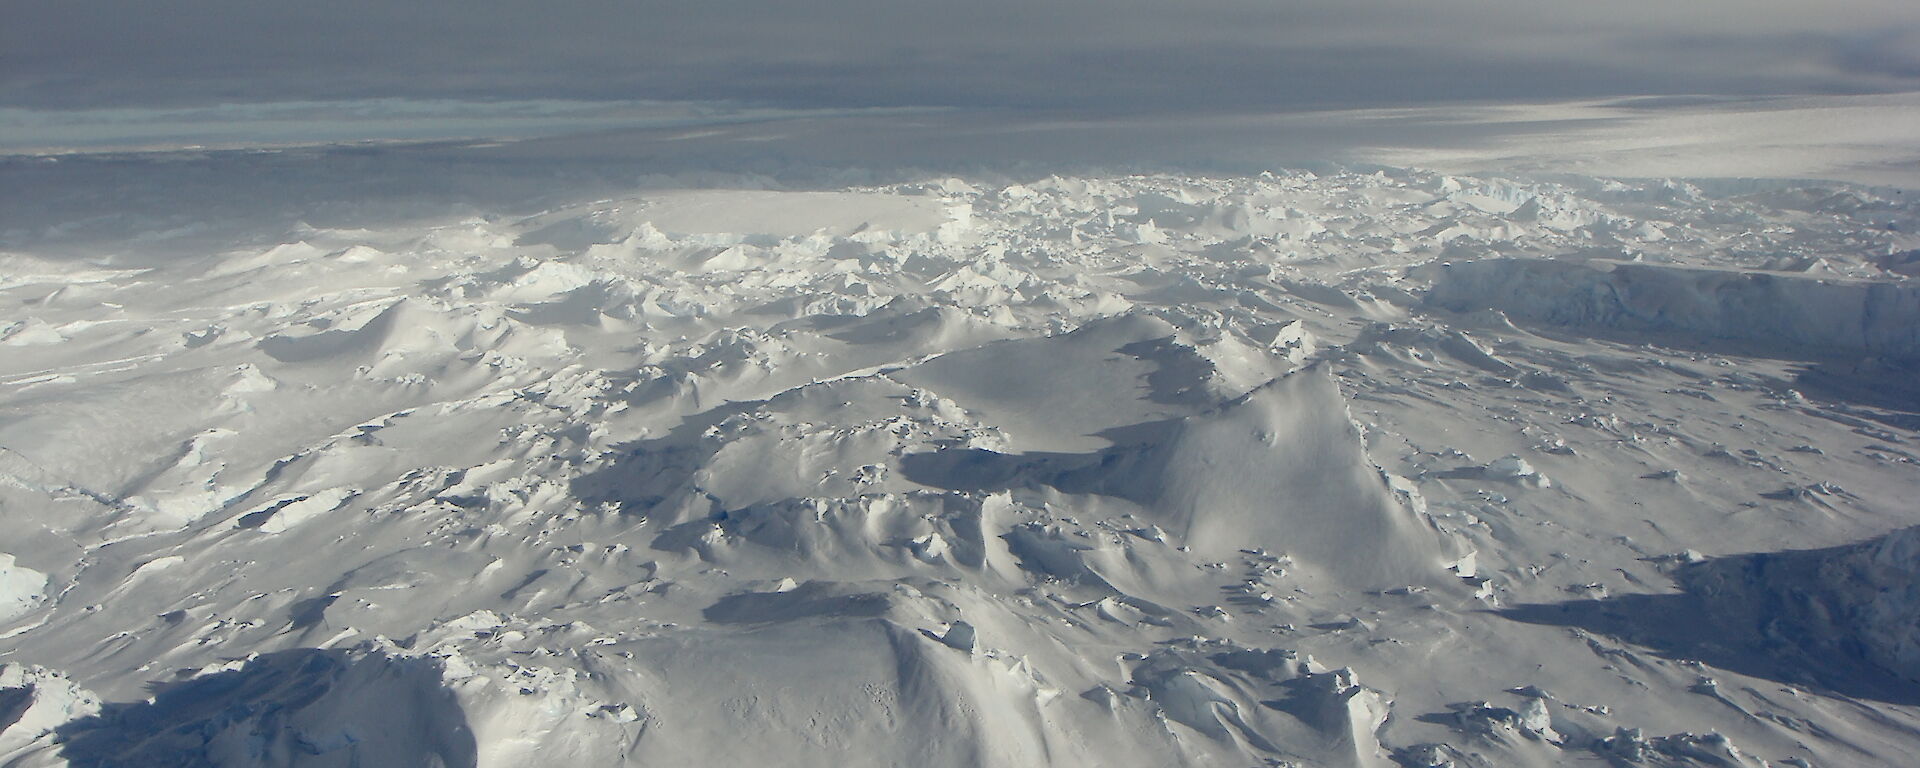 The Totten Glacier in East Antarctica reaches the Southern Ocean in a jumble of broken ice on the southeast side of Law Dome.